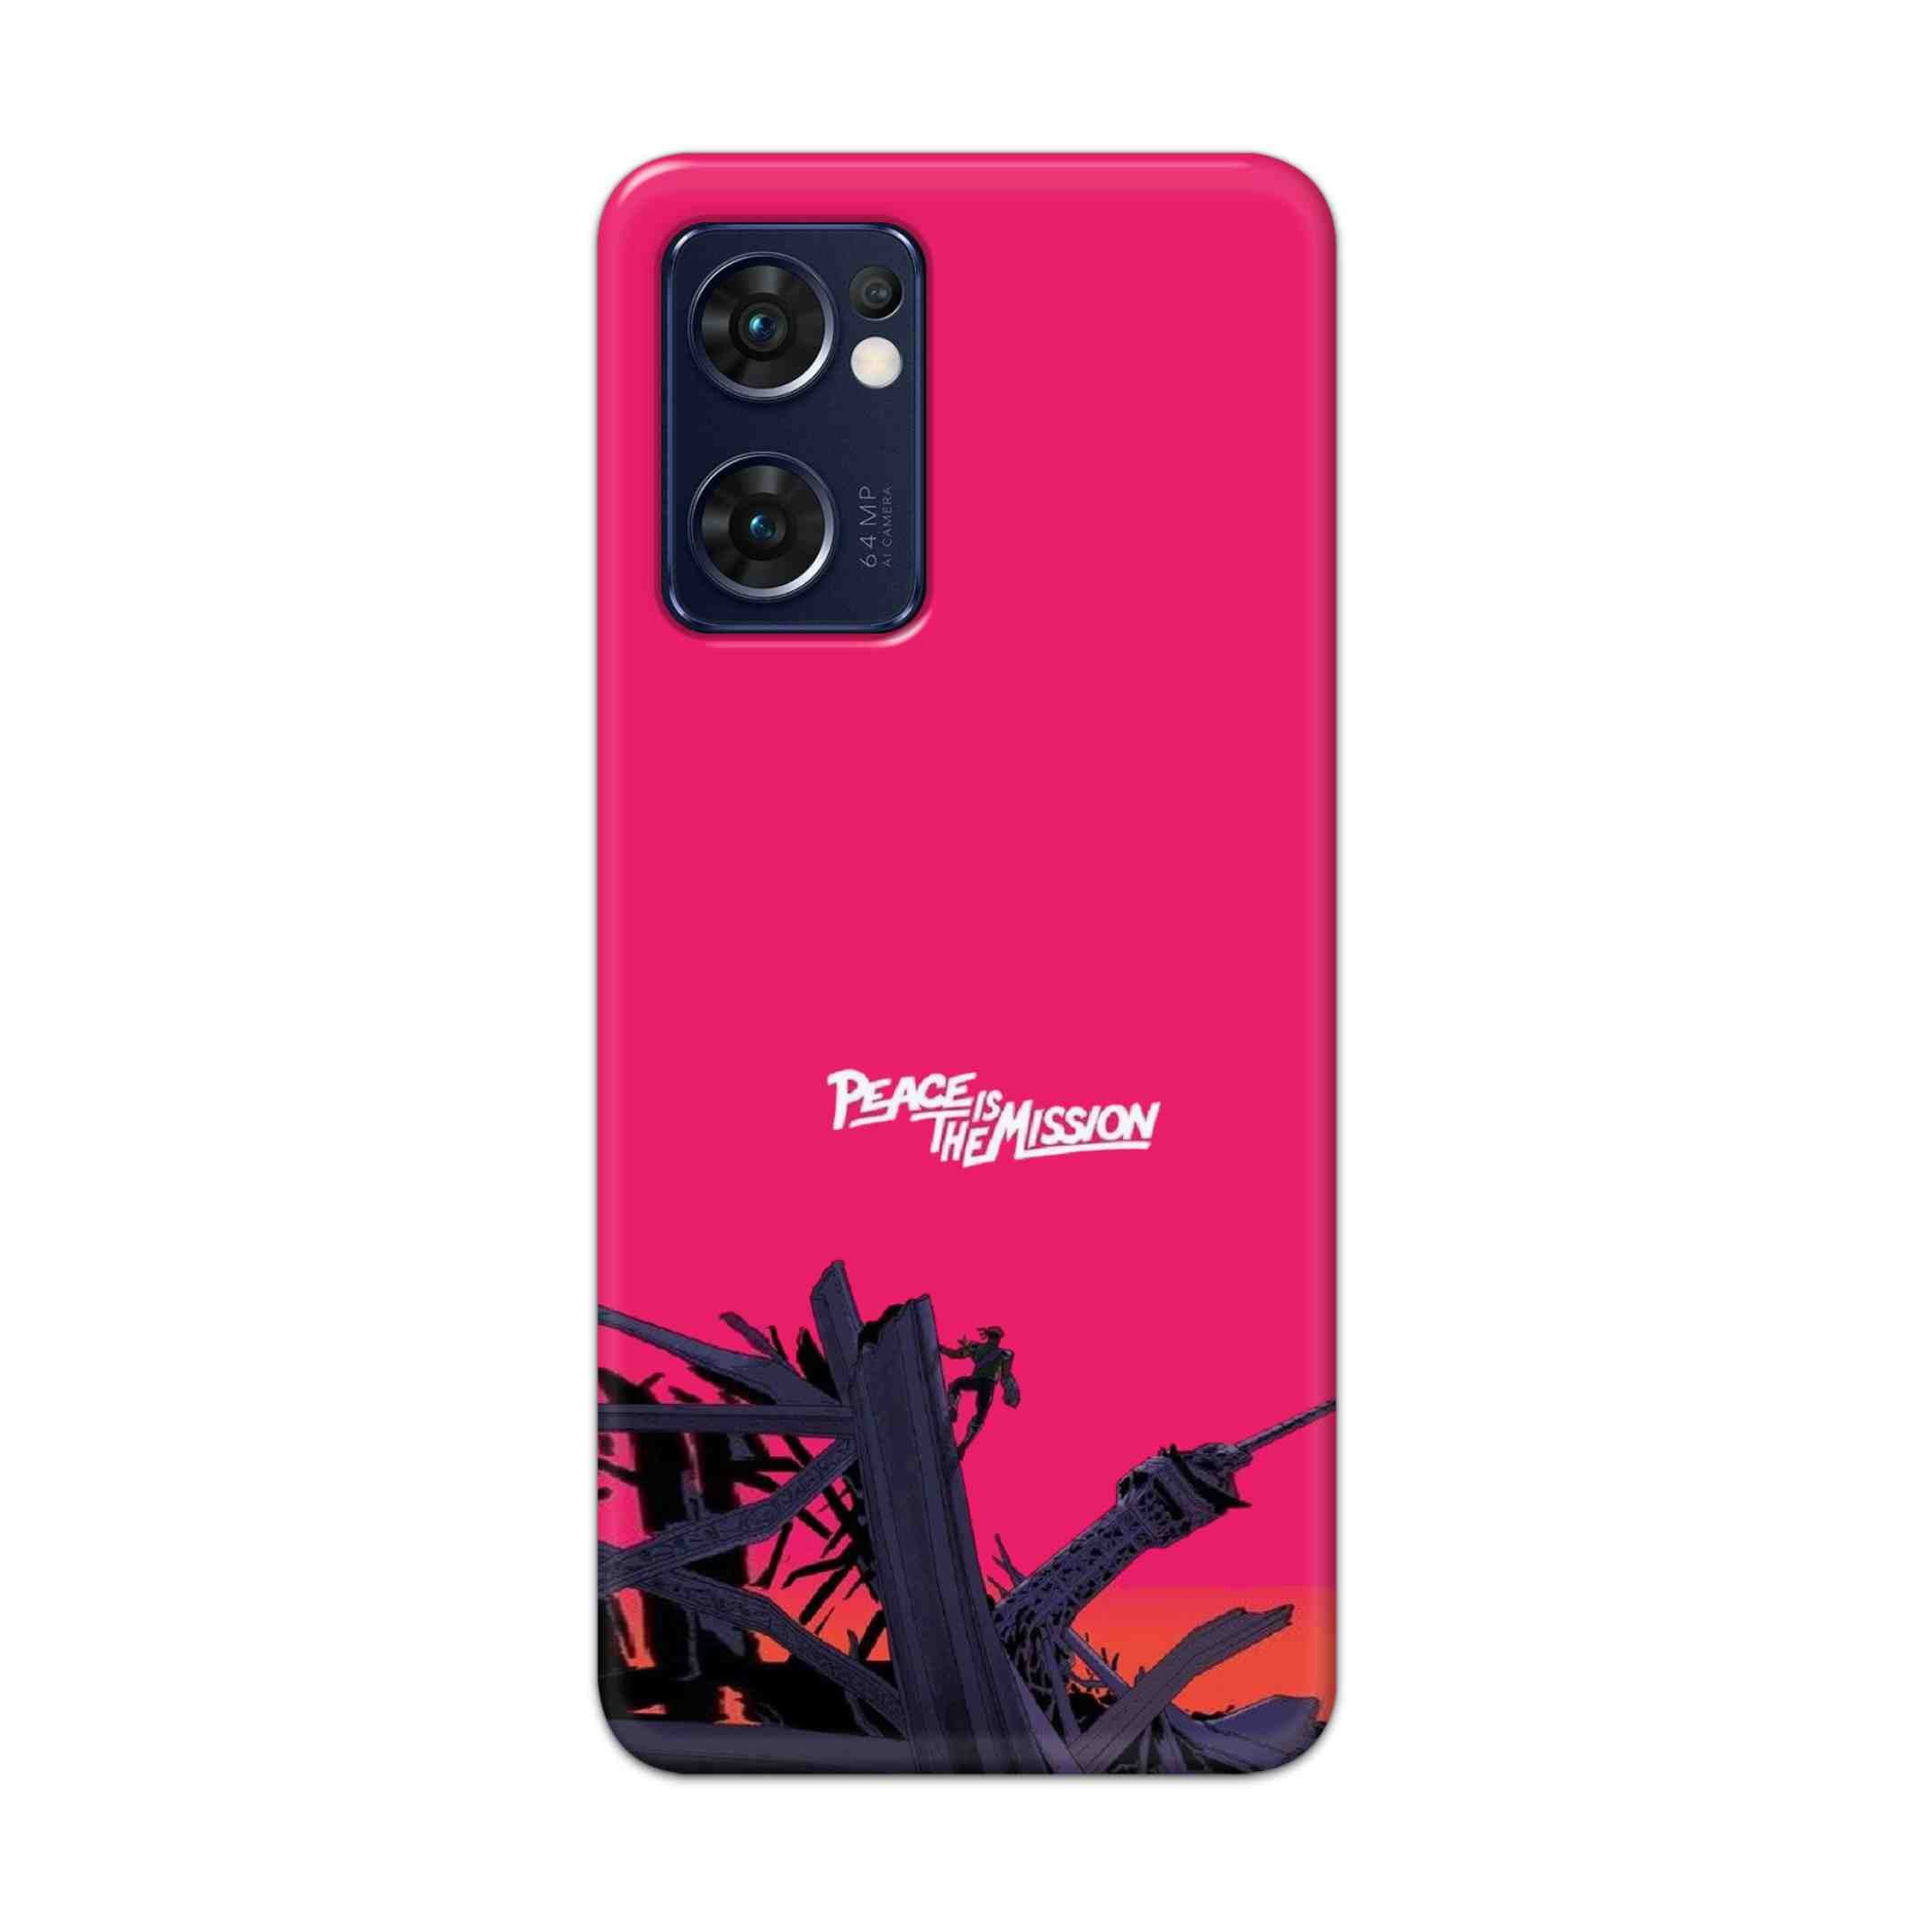 Buy Peace Is The Mission Hard Back Mobile Phone Case Cover For Reno 7 5G Online